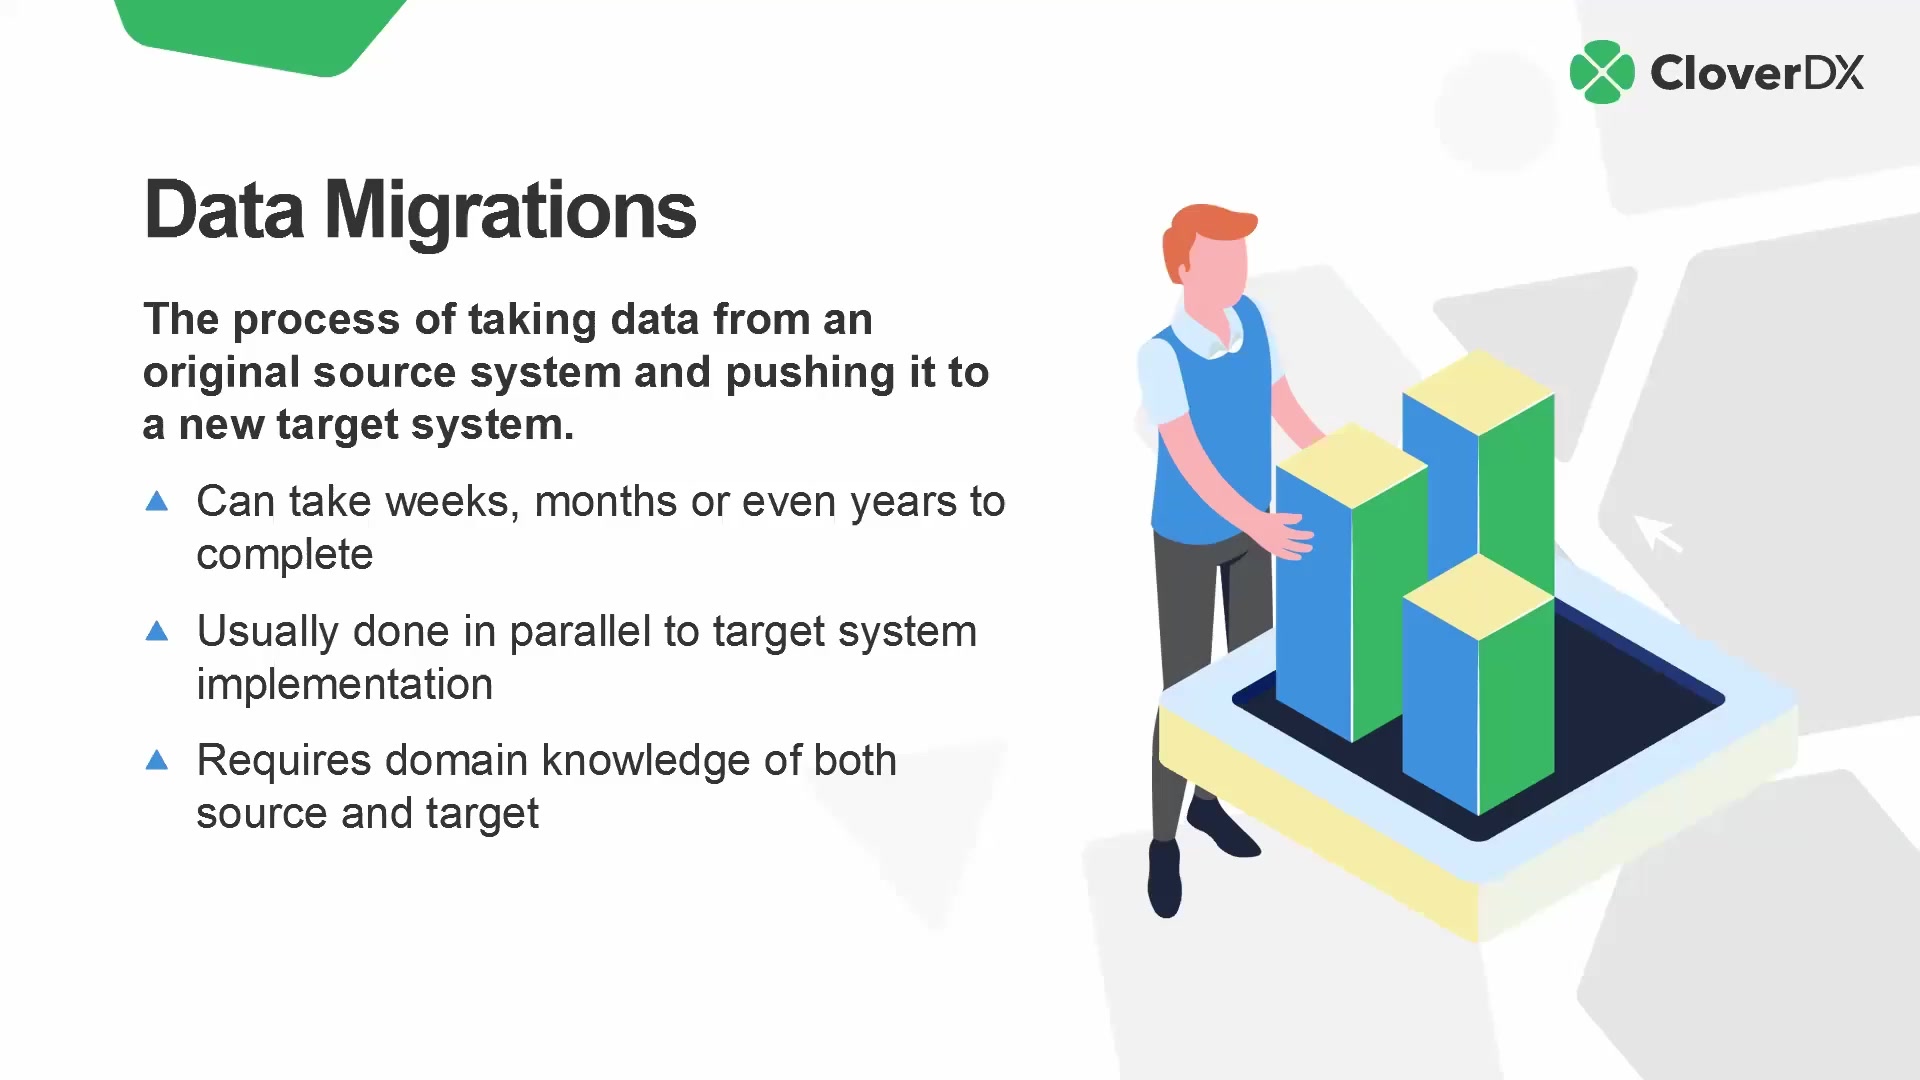 Thumbnail: Review of data migration from legacy system